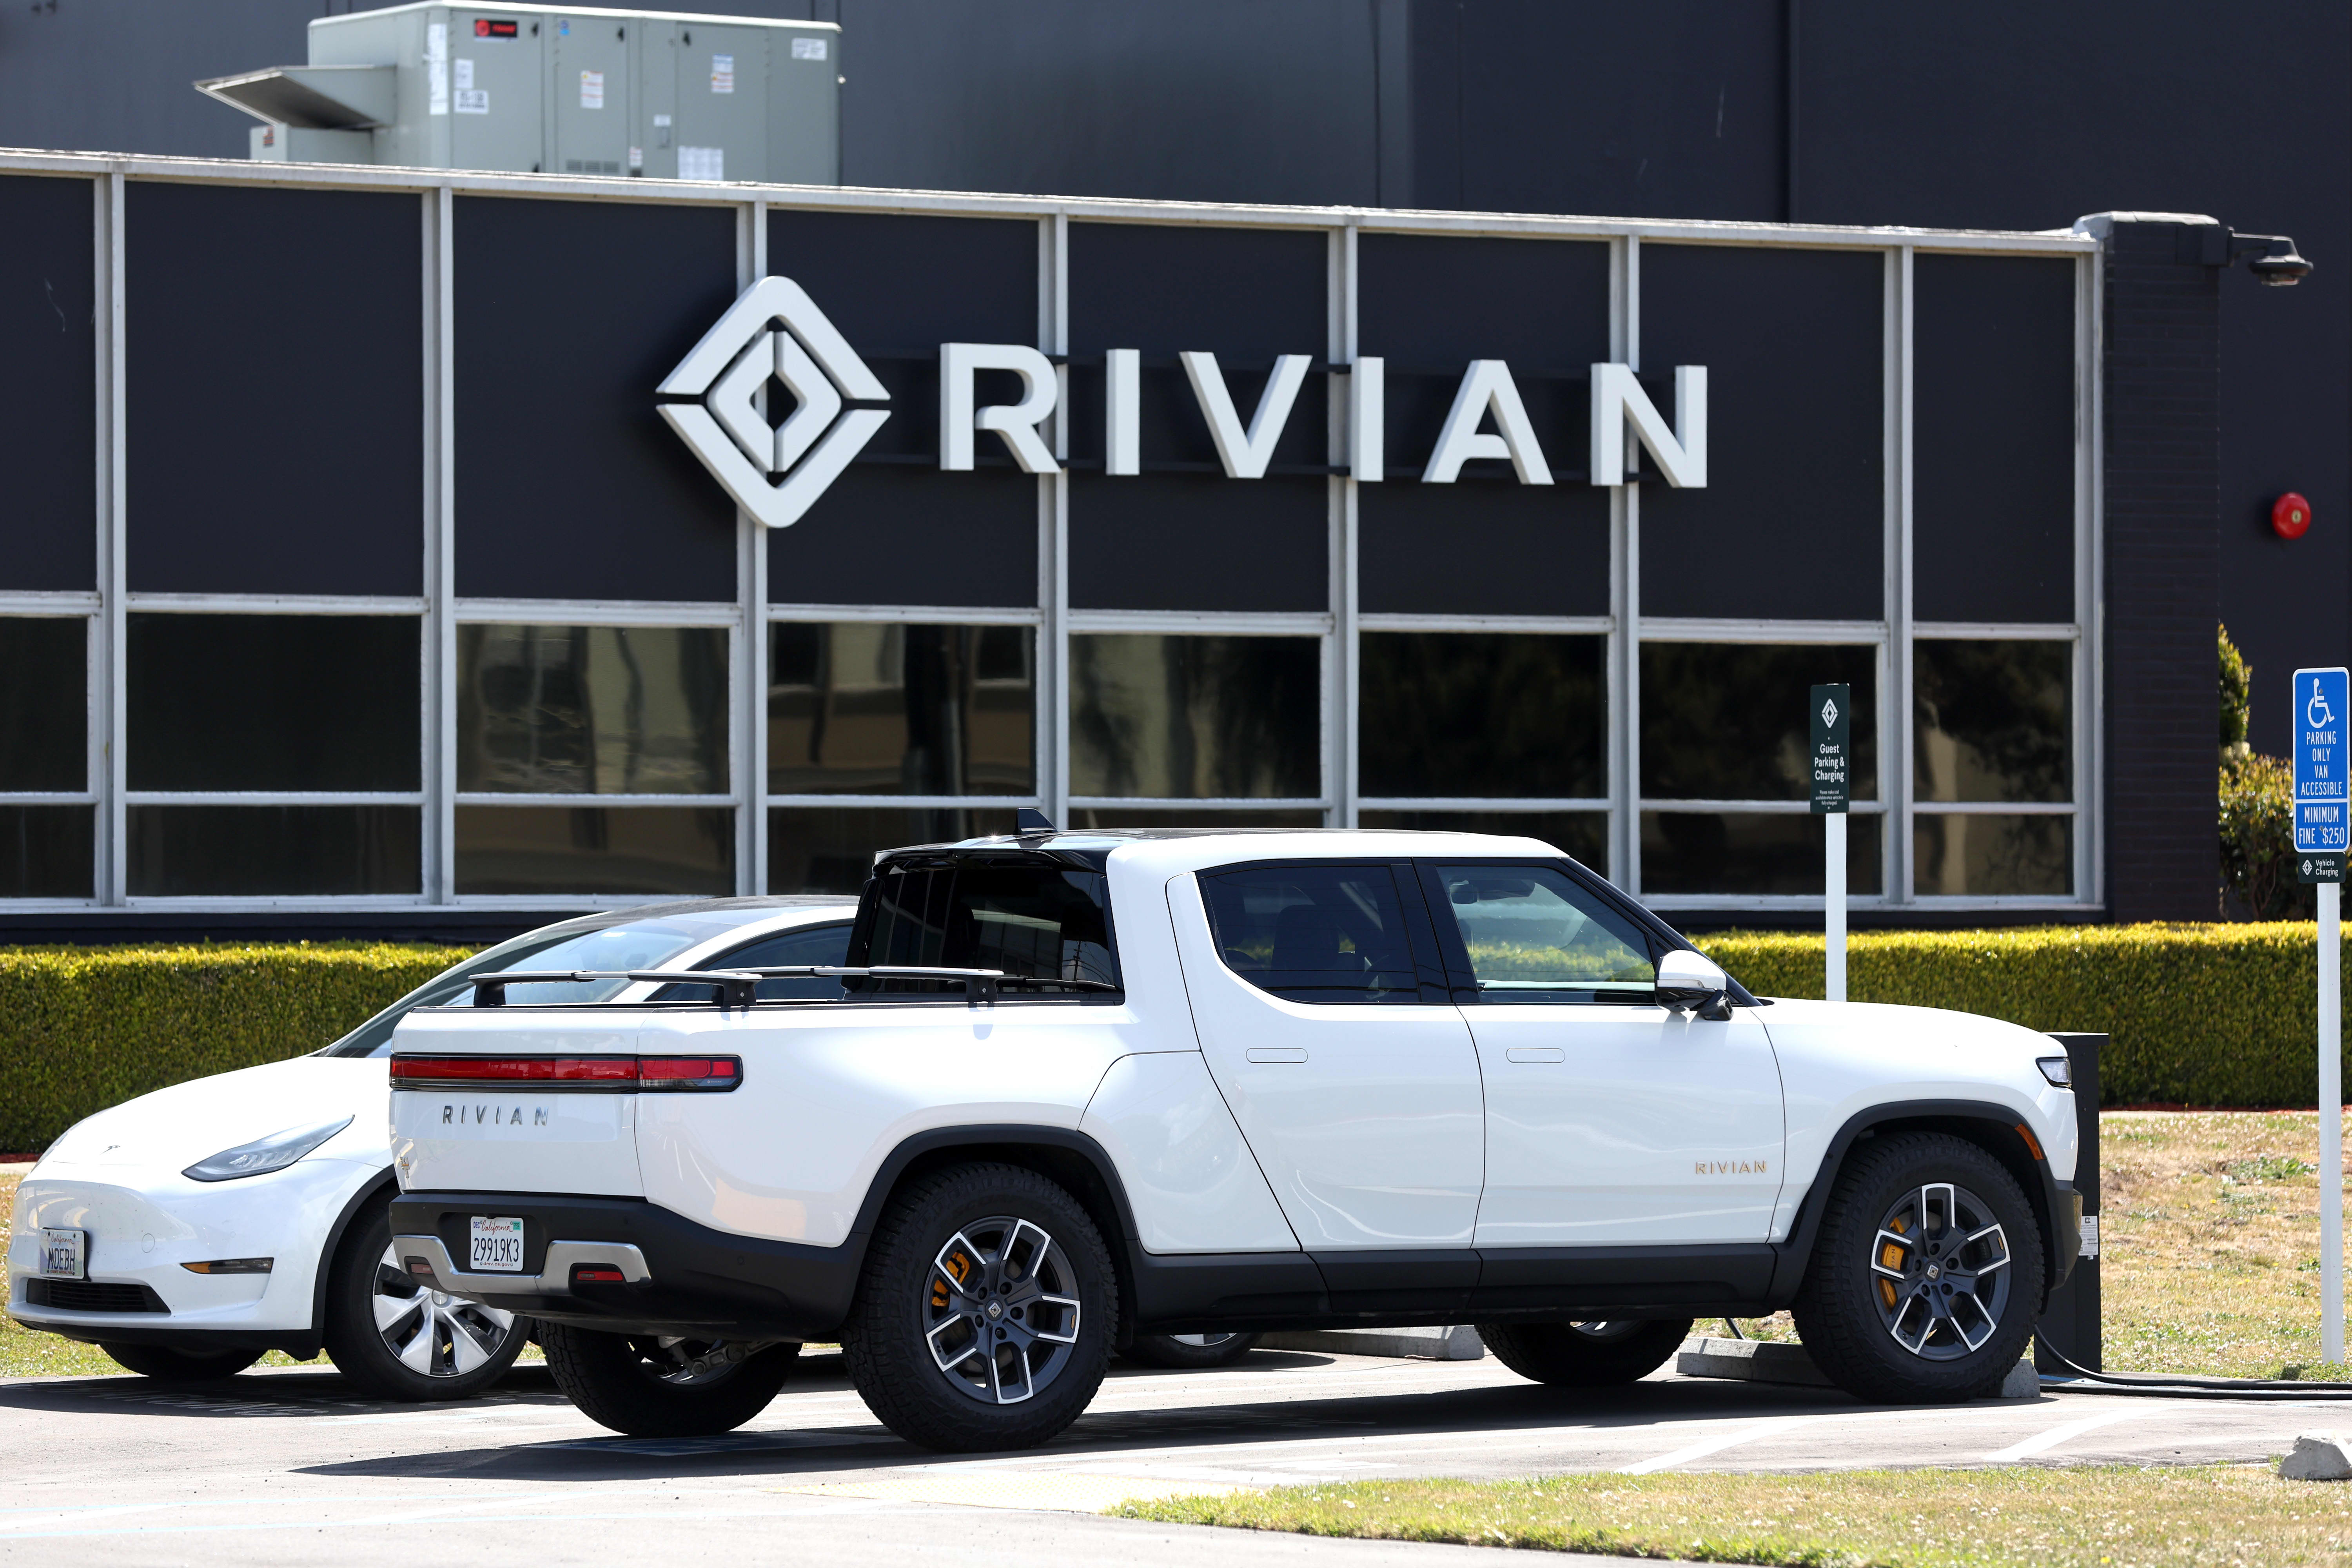 Overcome Charging Issues w/ an Electric Vehicle - Experienced By One Customer & Resolved Quickly by Rivian Service Center